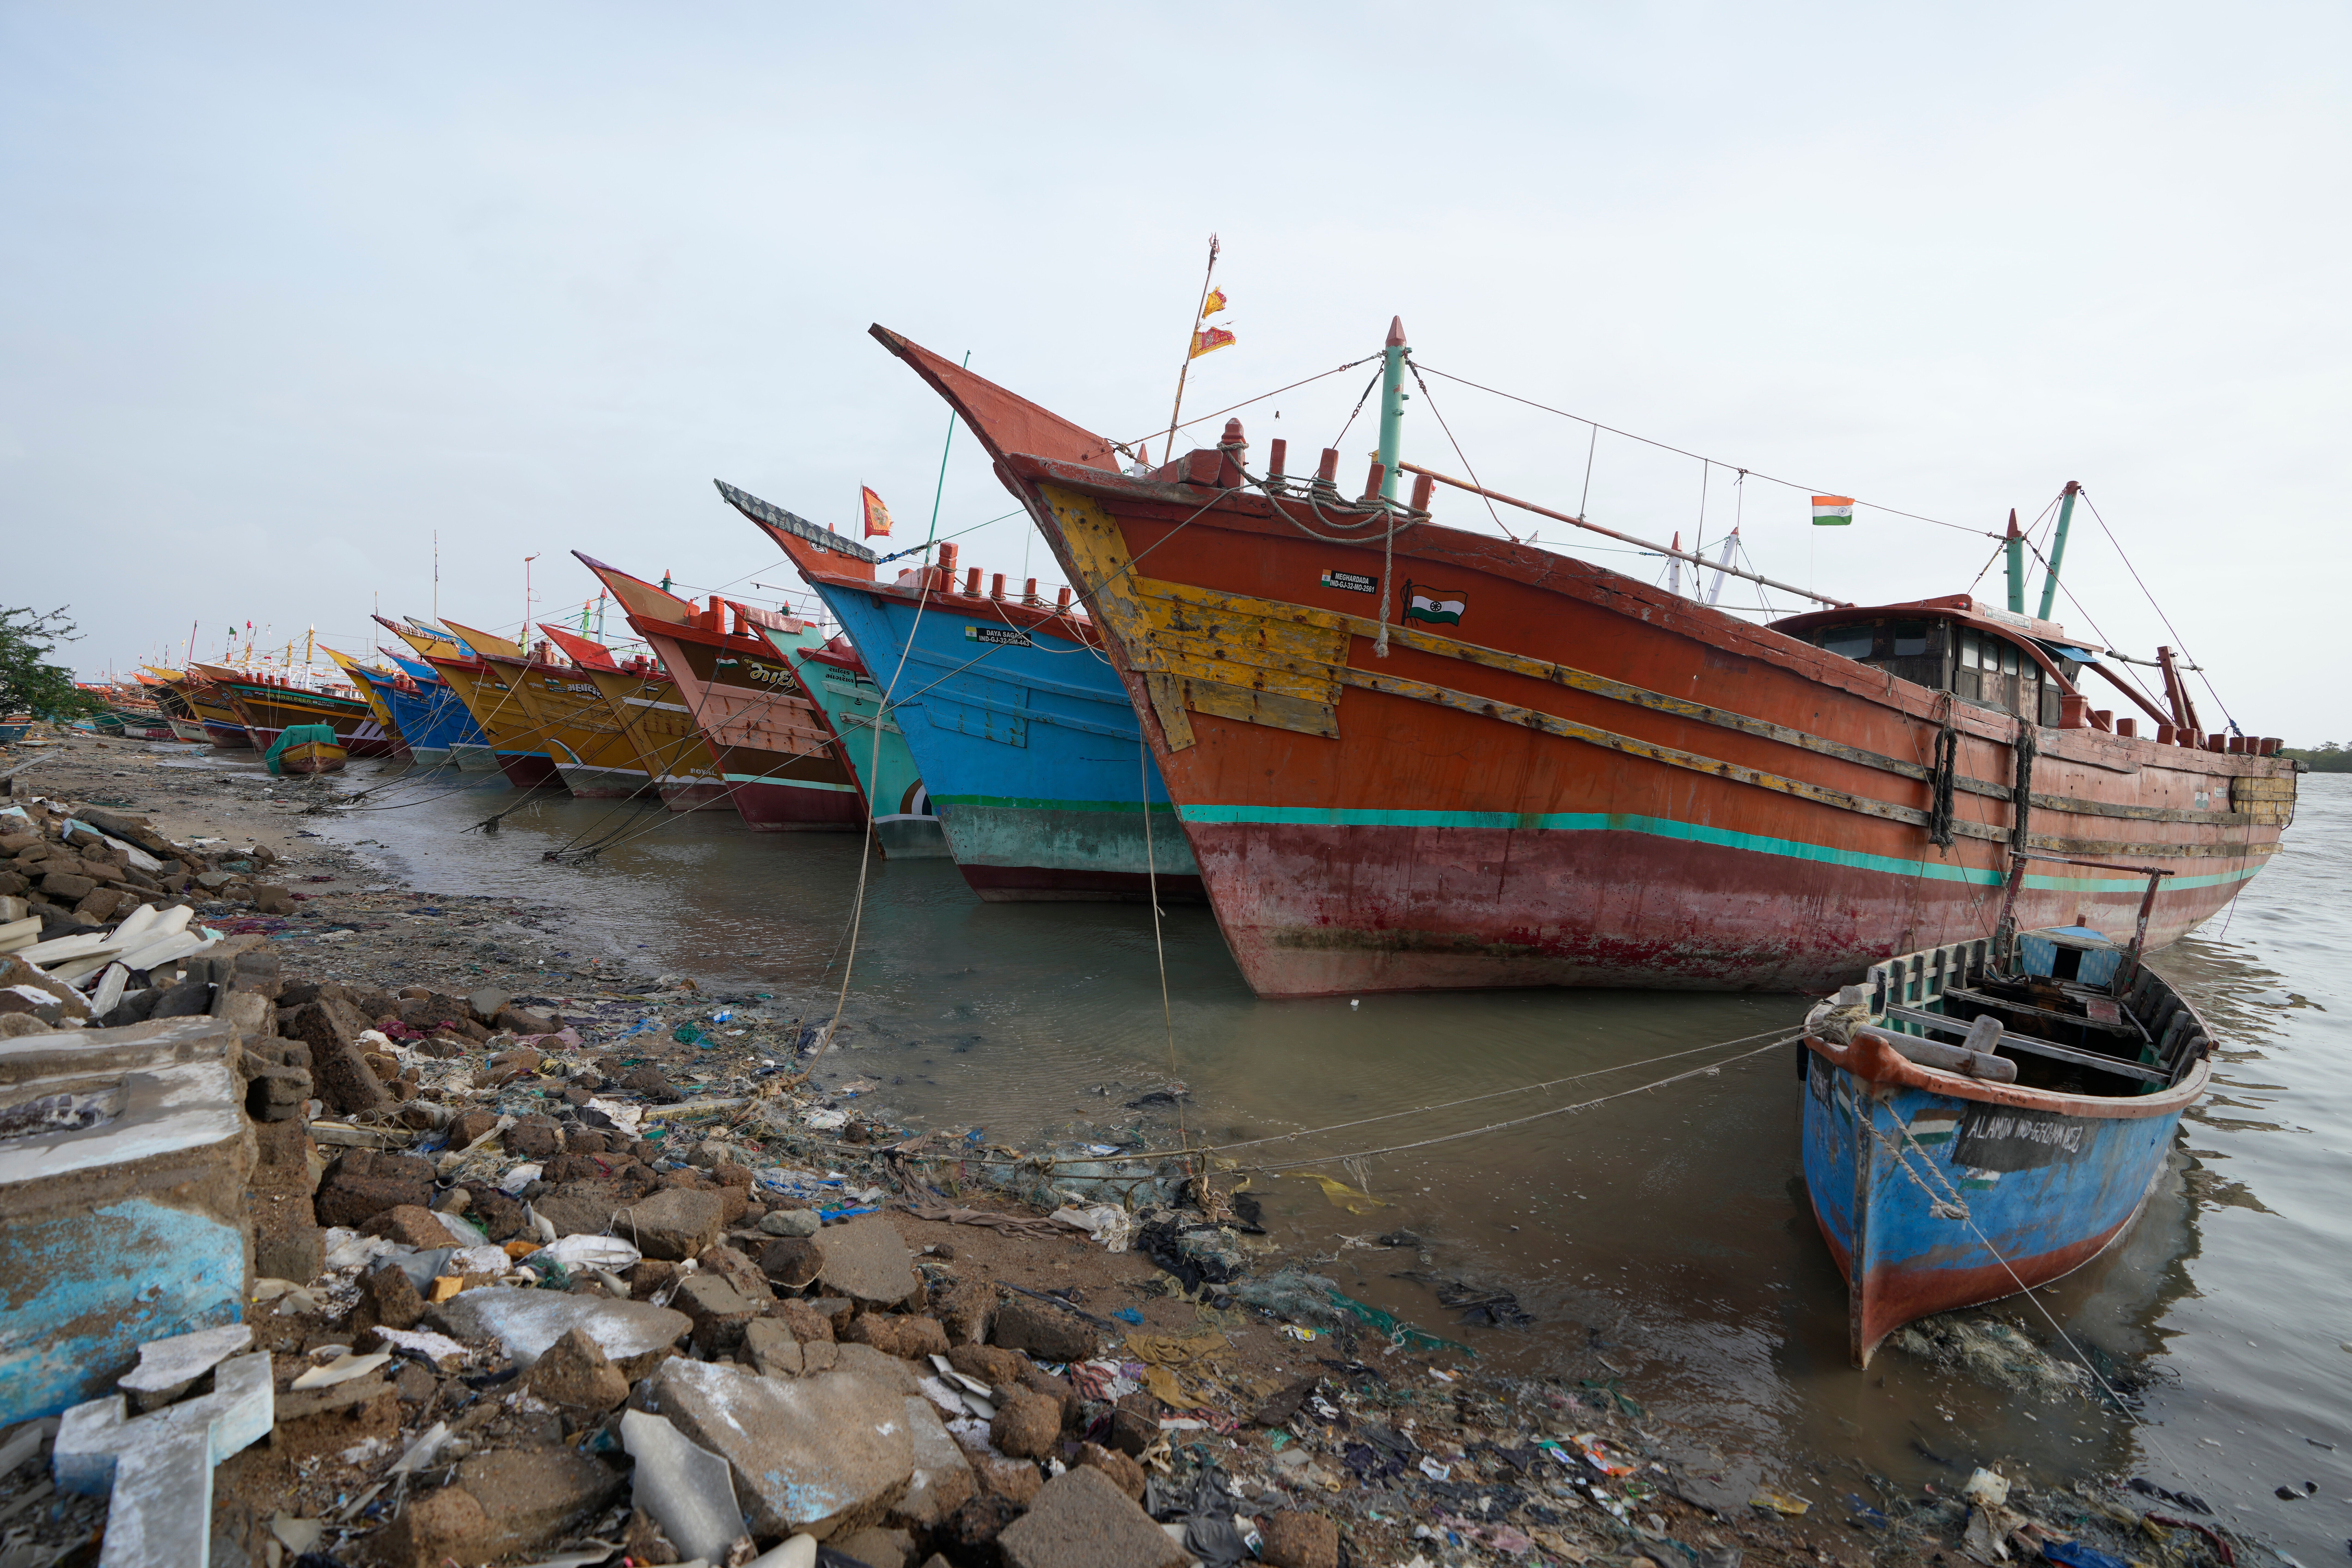 Boats stand anchored at Jakhau Port in Kutch district, India